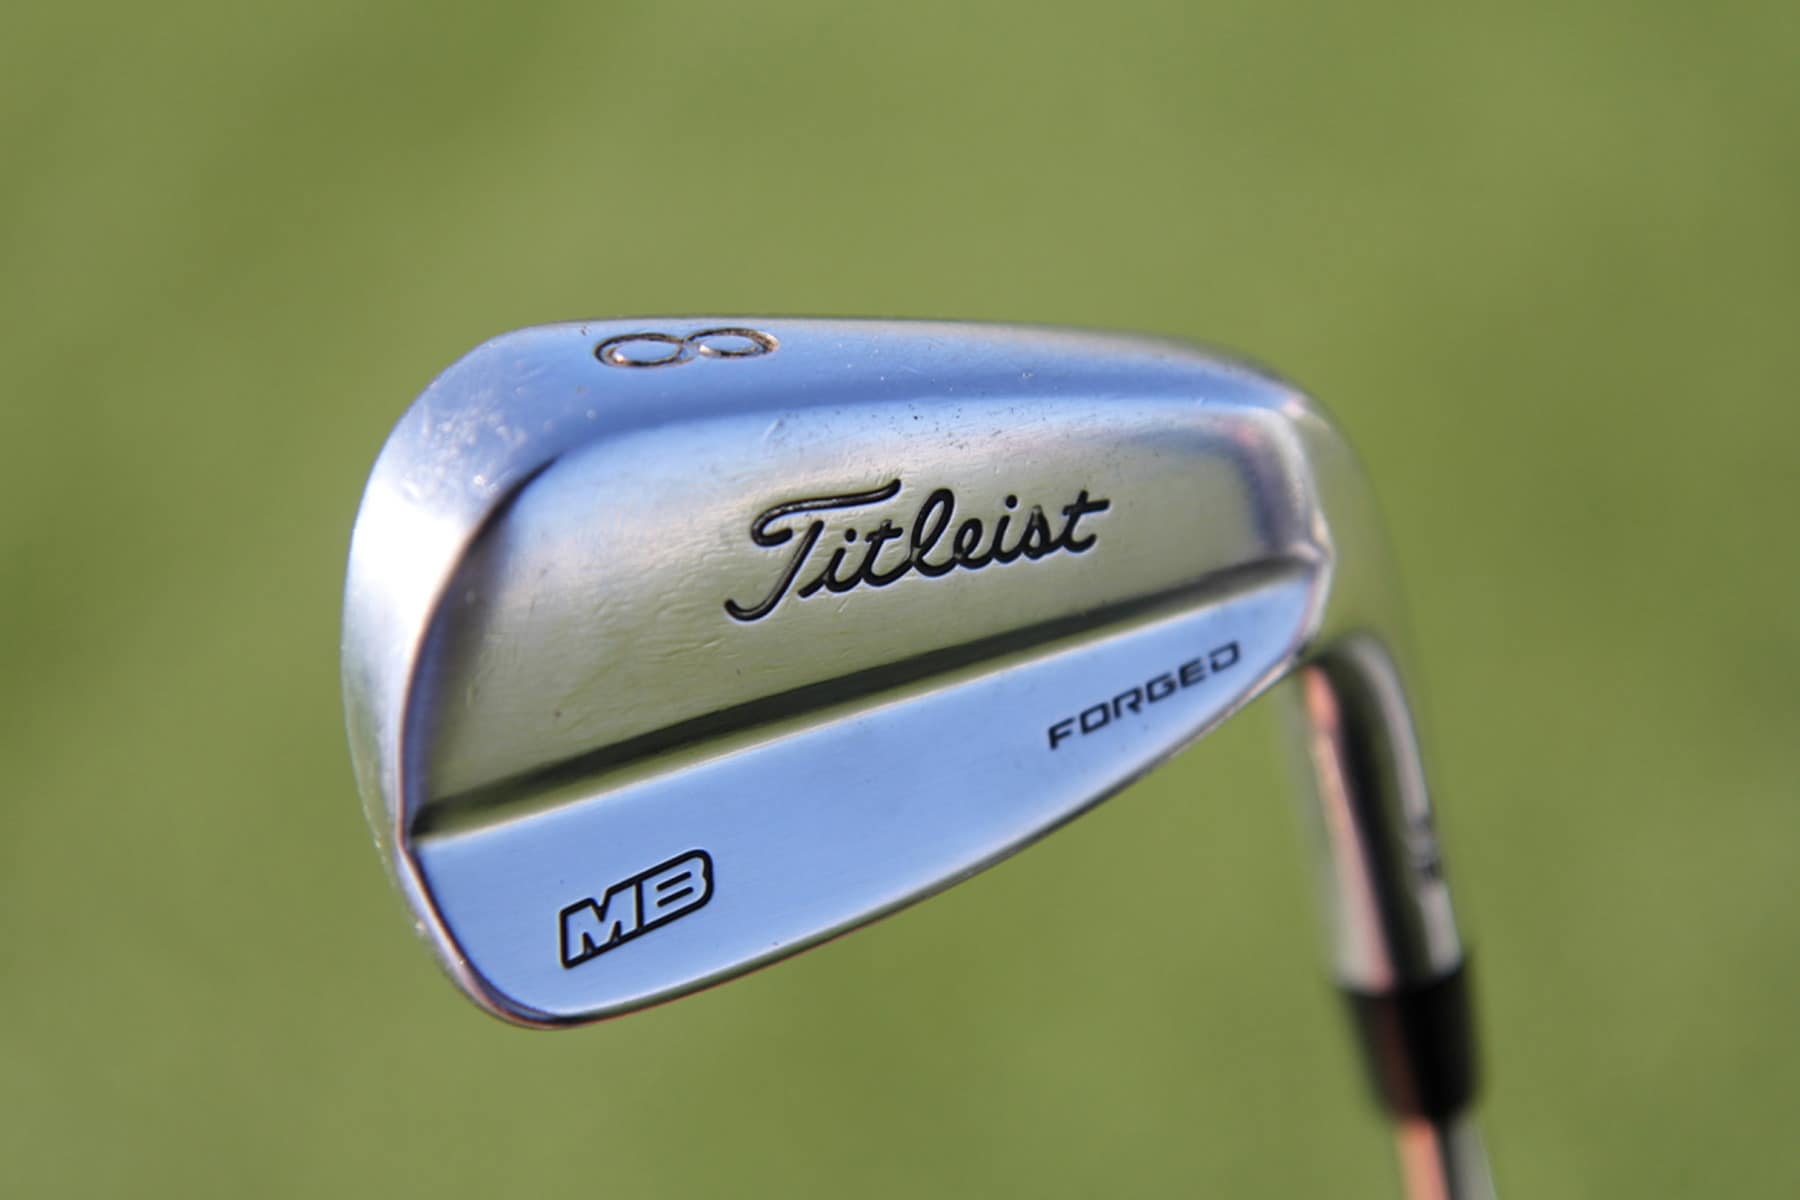 Justin carries 718 MB (5-9) irons for maximum feel...